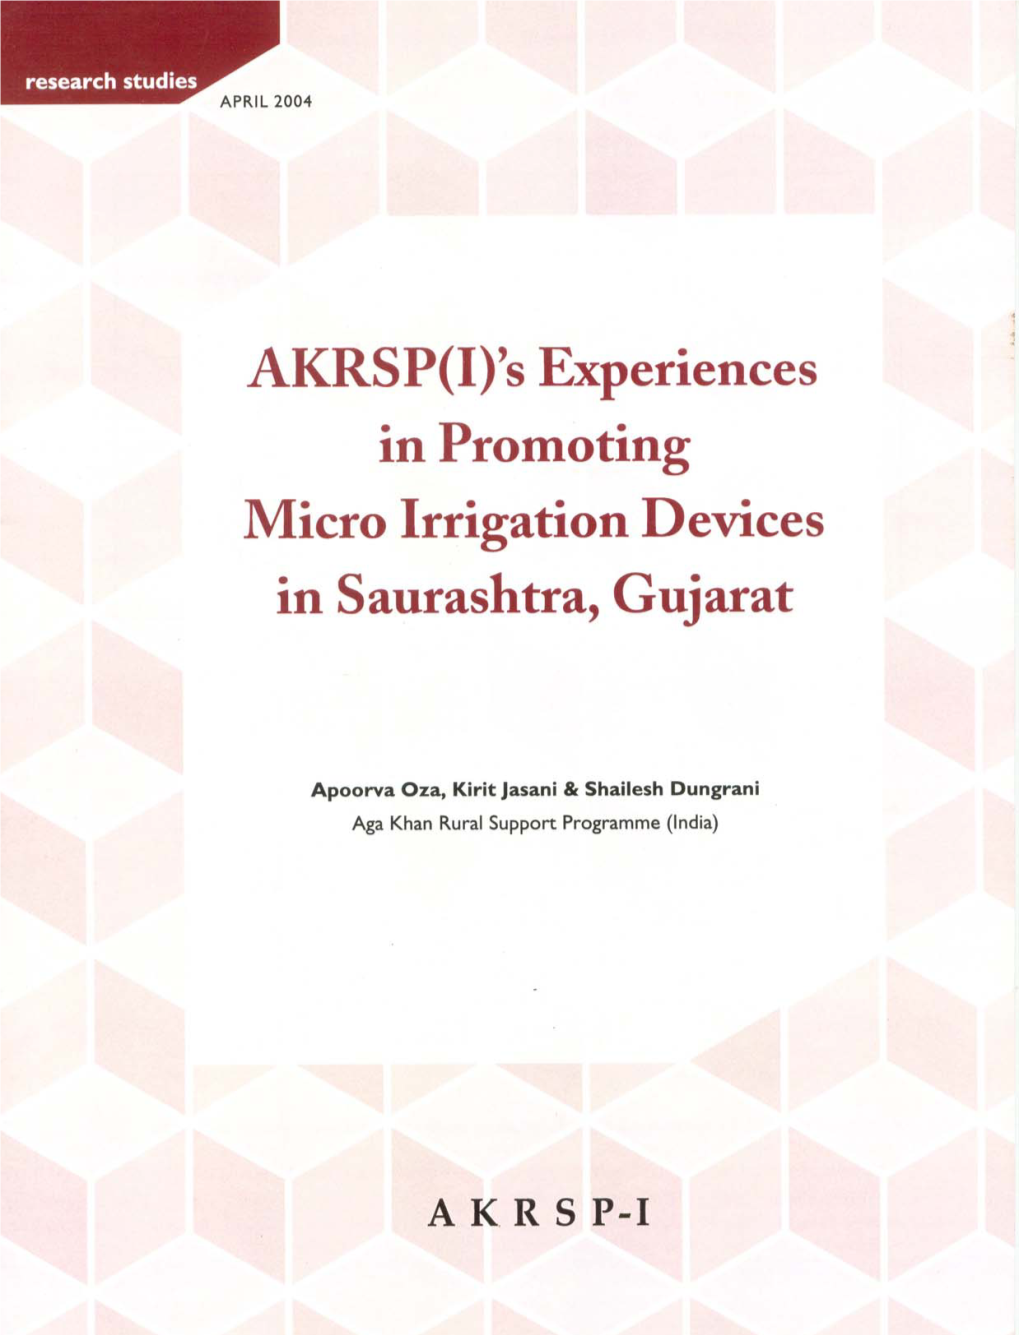 AKRSP(I)’S Experiences in Promoting Micro Irrigation Devices in Saurashtra, Gujarat